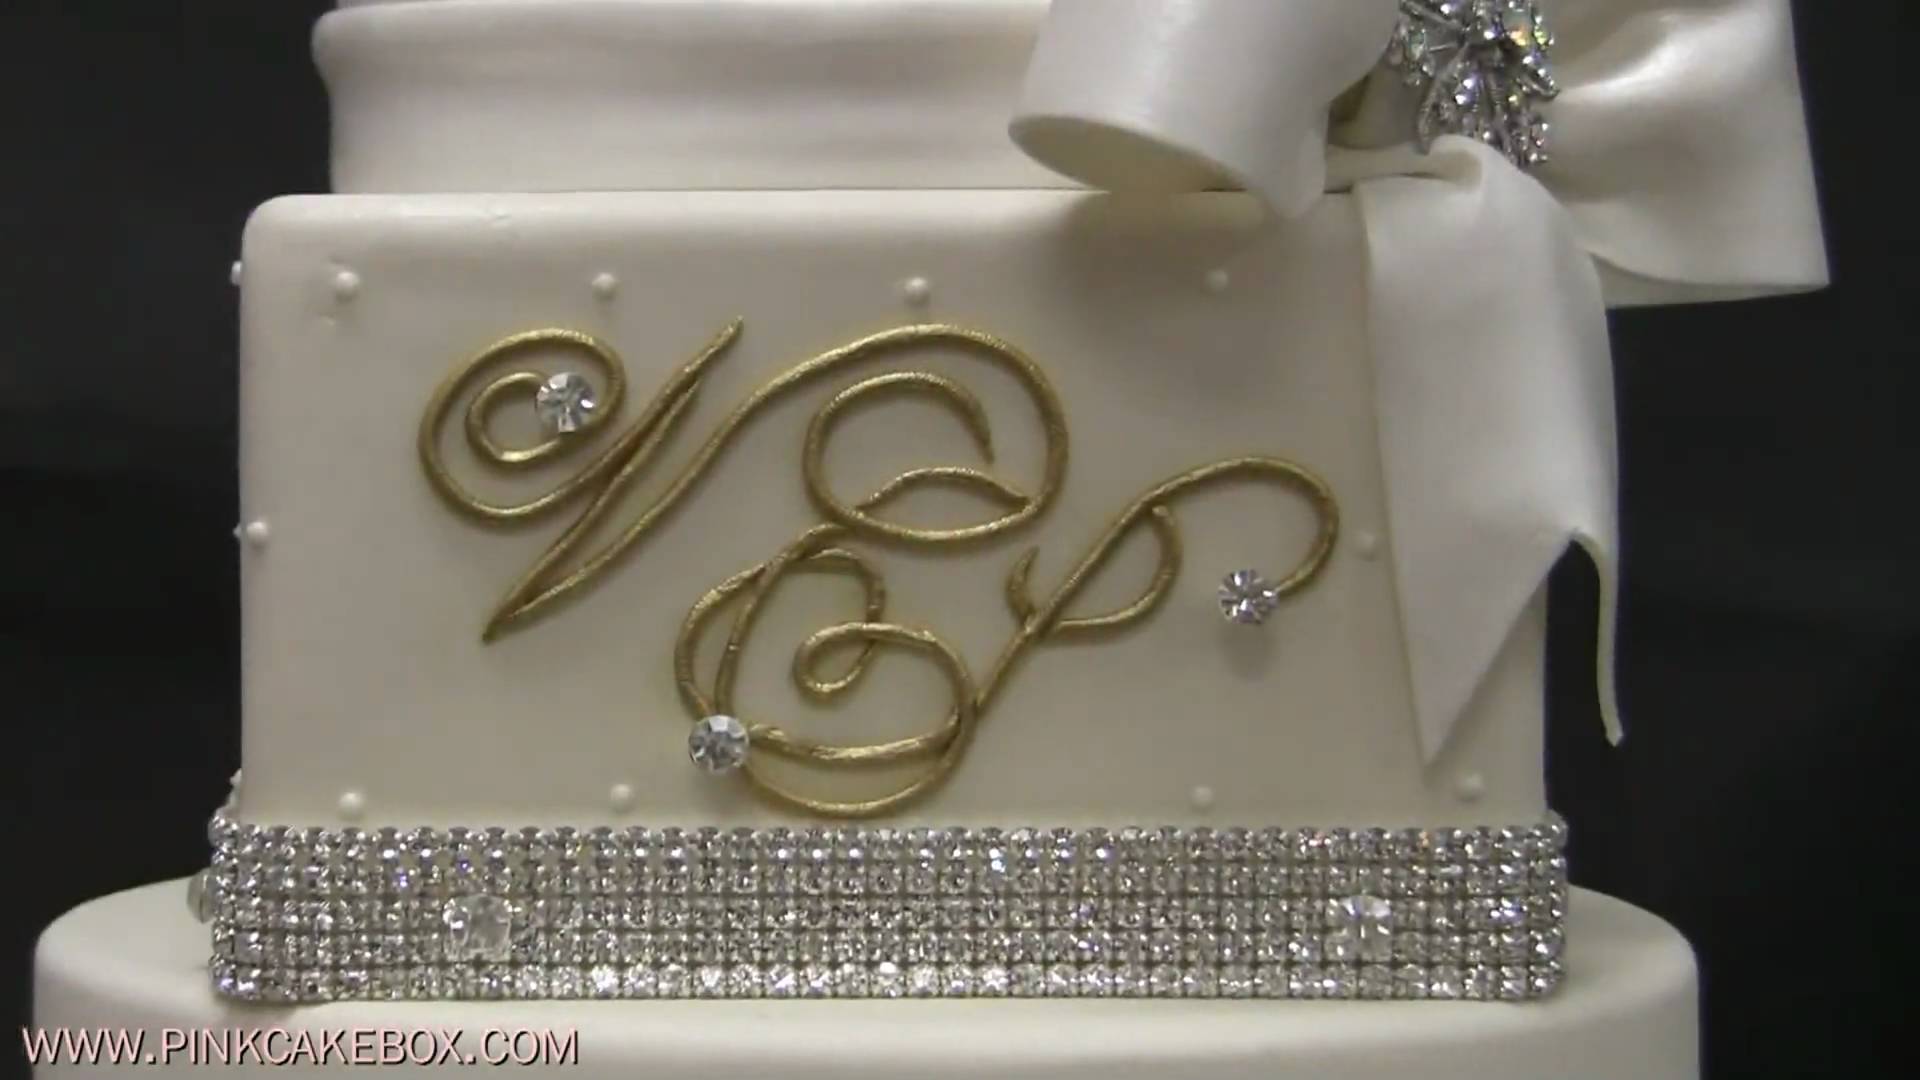 Square Wedding Cakes with Bling